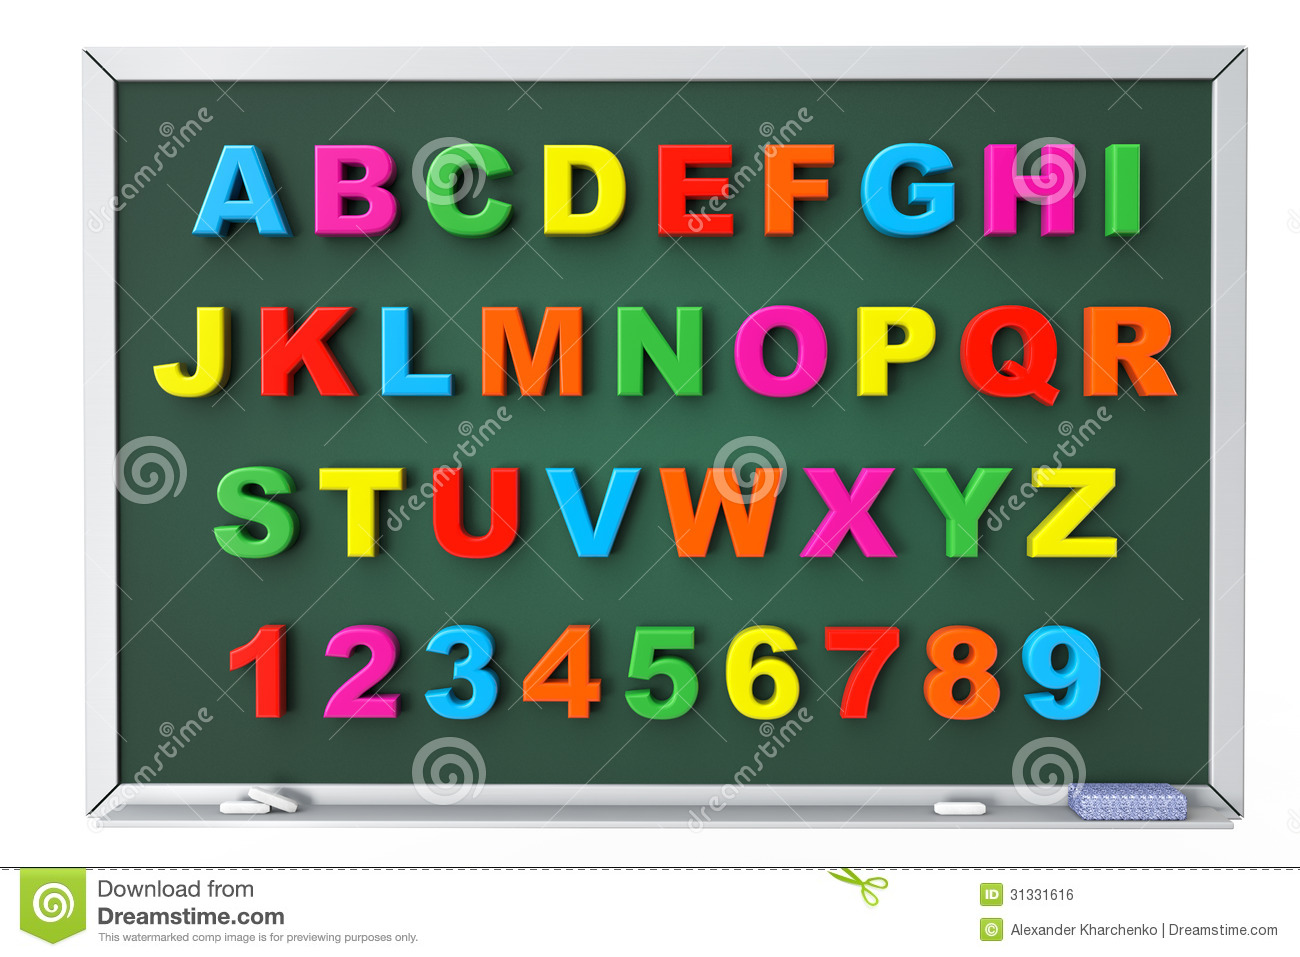 Alphabet Toy Magnetic Letters Over Blackboard Royalty Free Stock Image